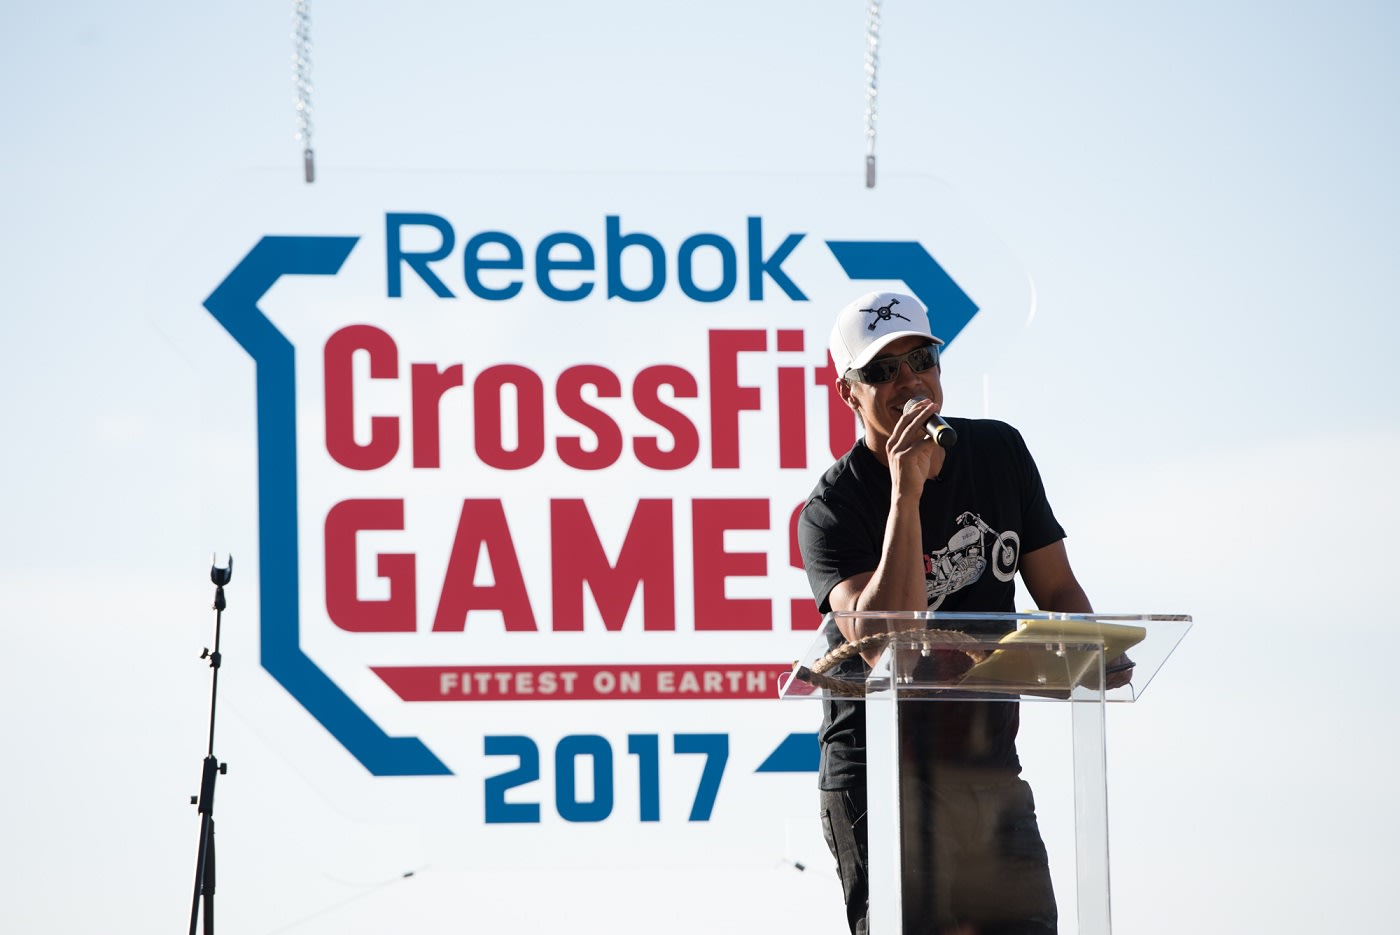 crossfit-games-first-responders-friday